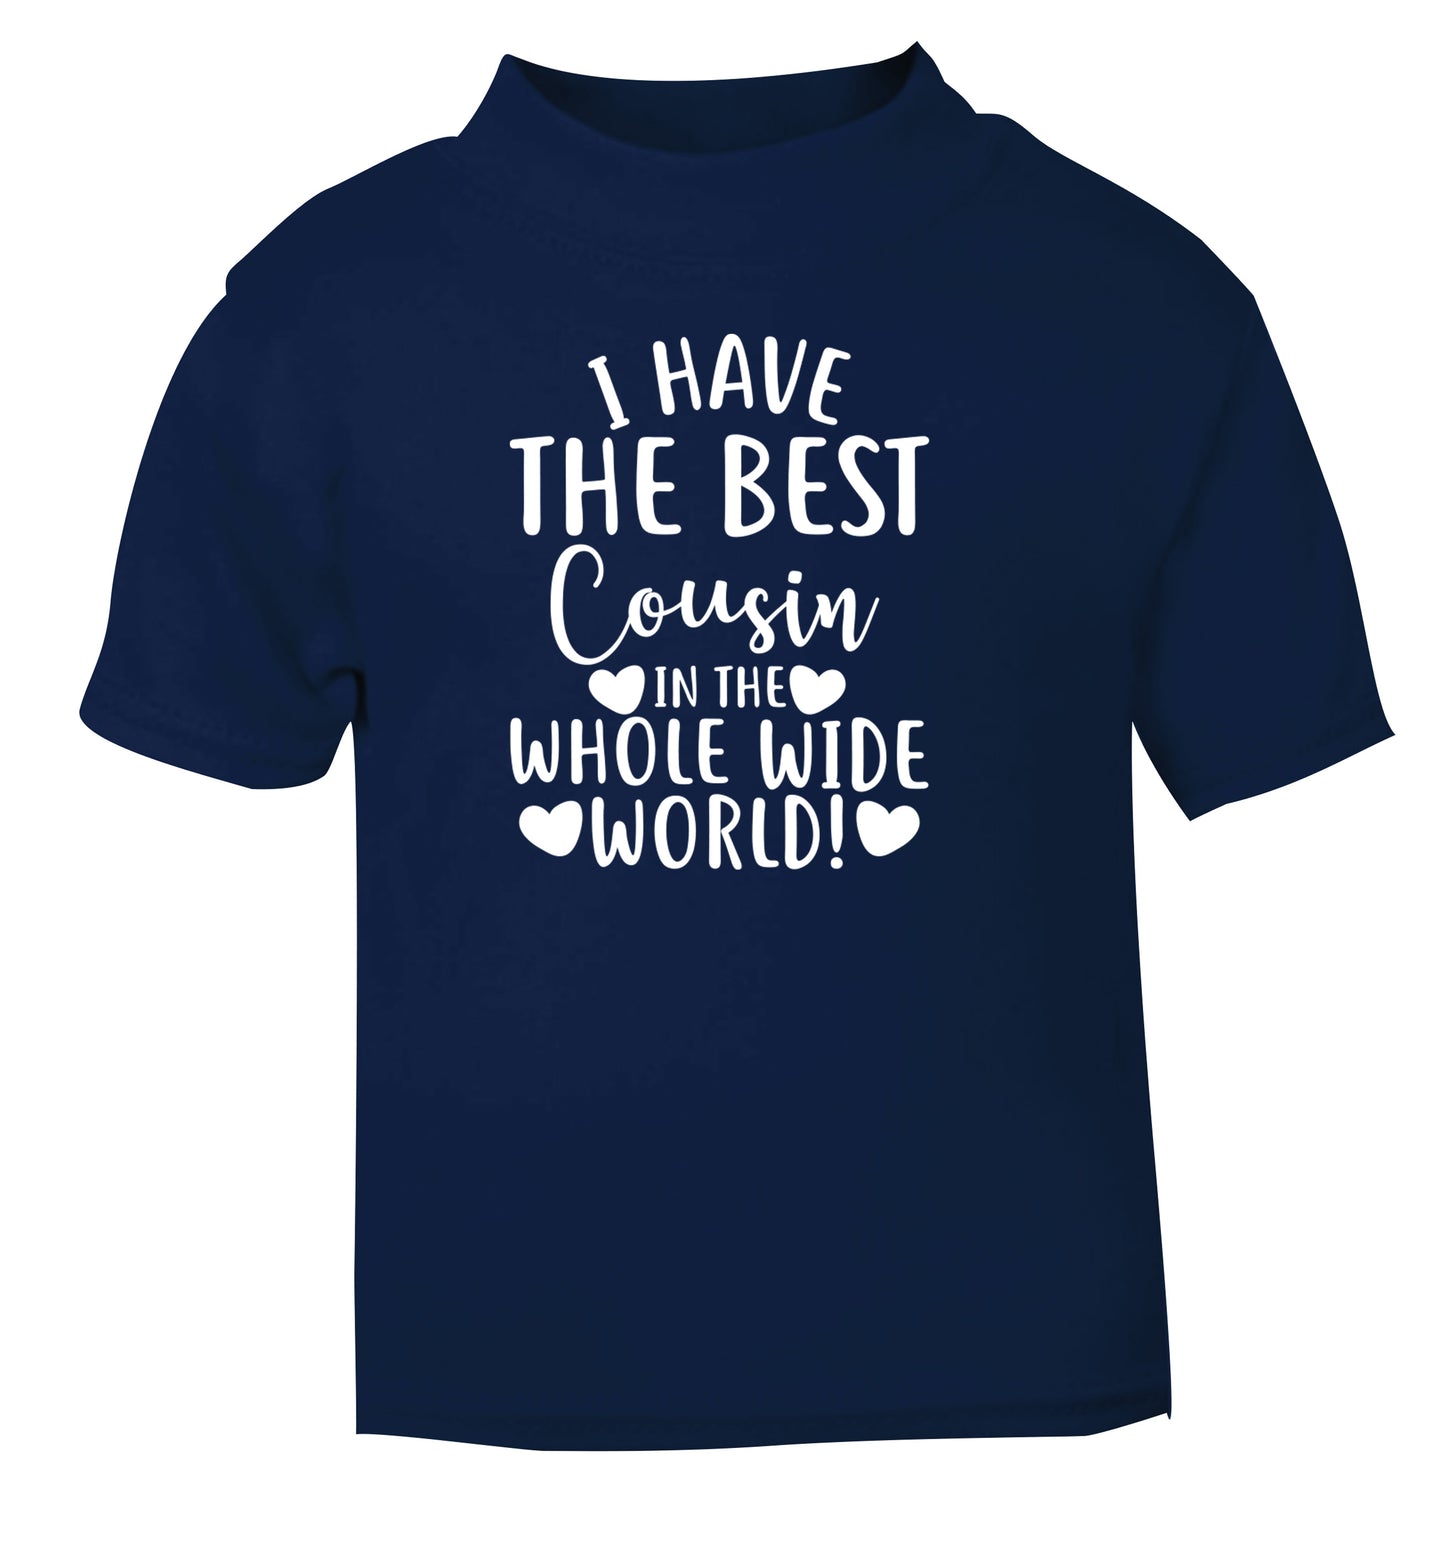 I have the best cousin in the whole wide world! navy Baby Toddler Tshirt 2 Years